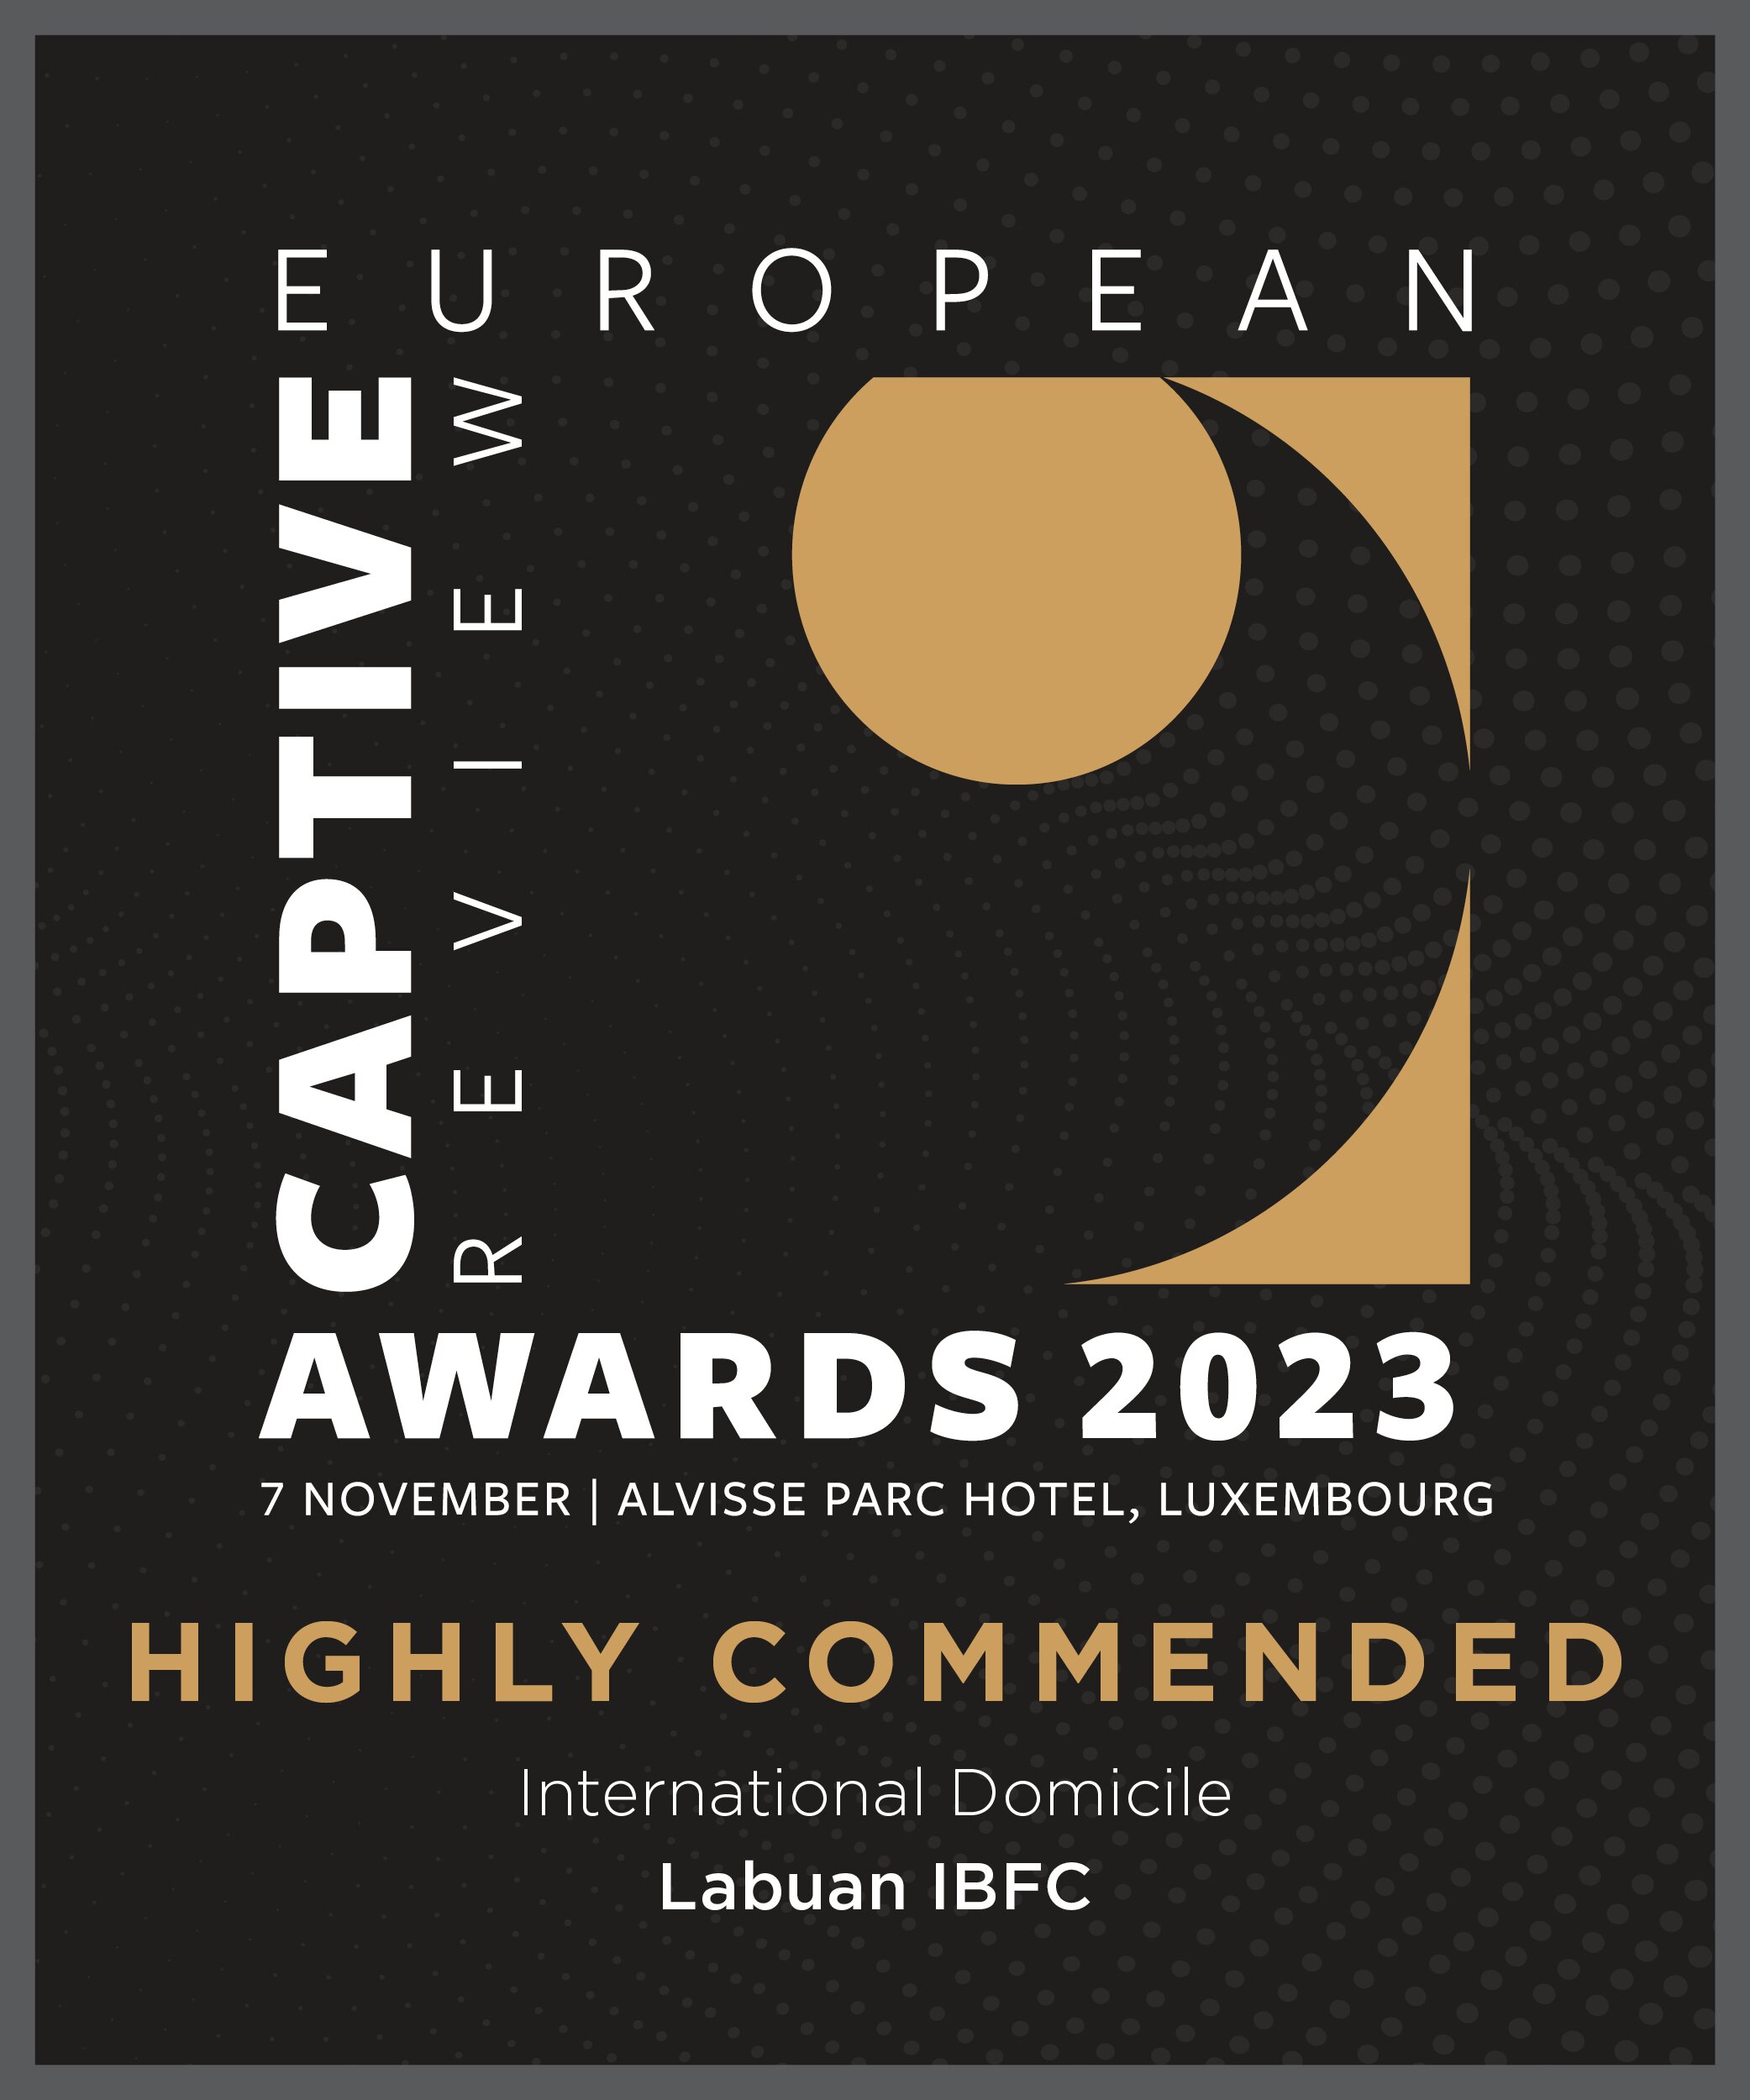 ‘Highly Commended International Domicile’ at the European Captive Review Awards 2023